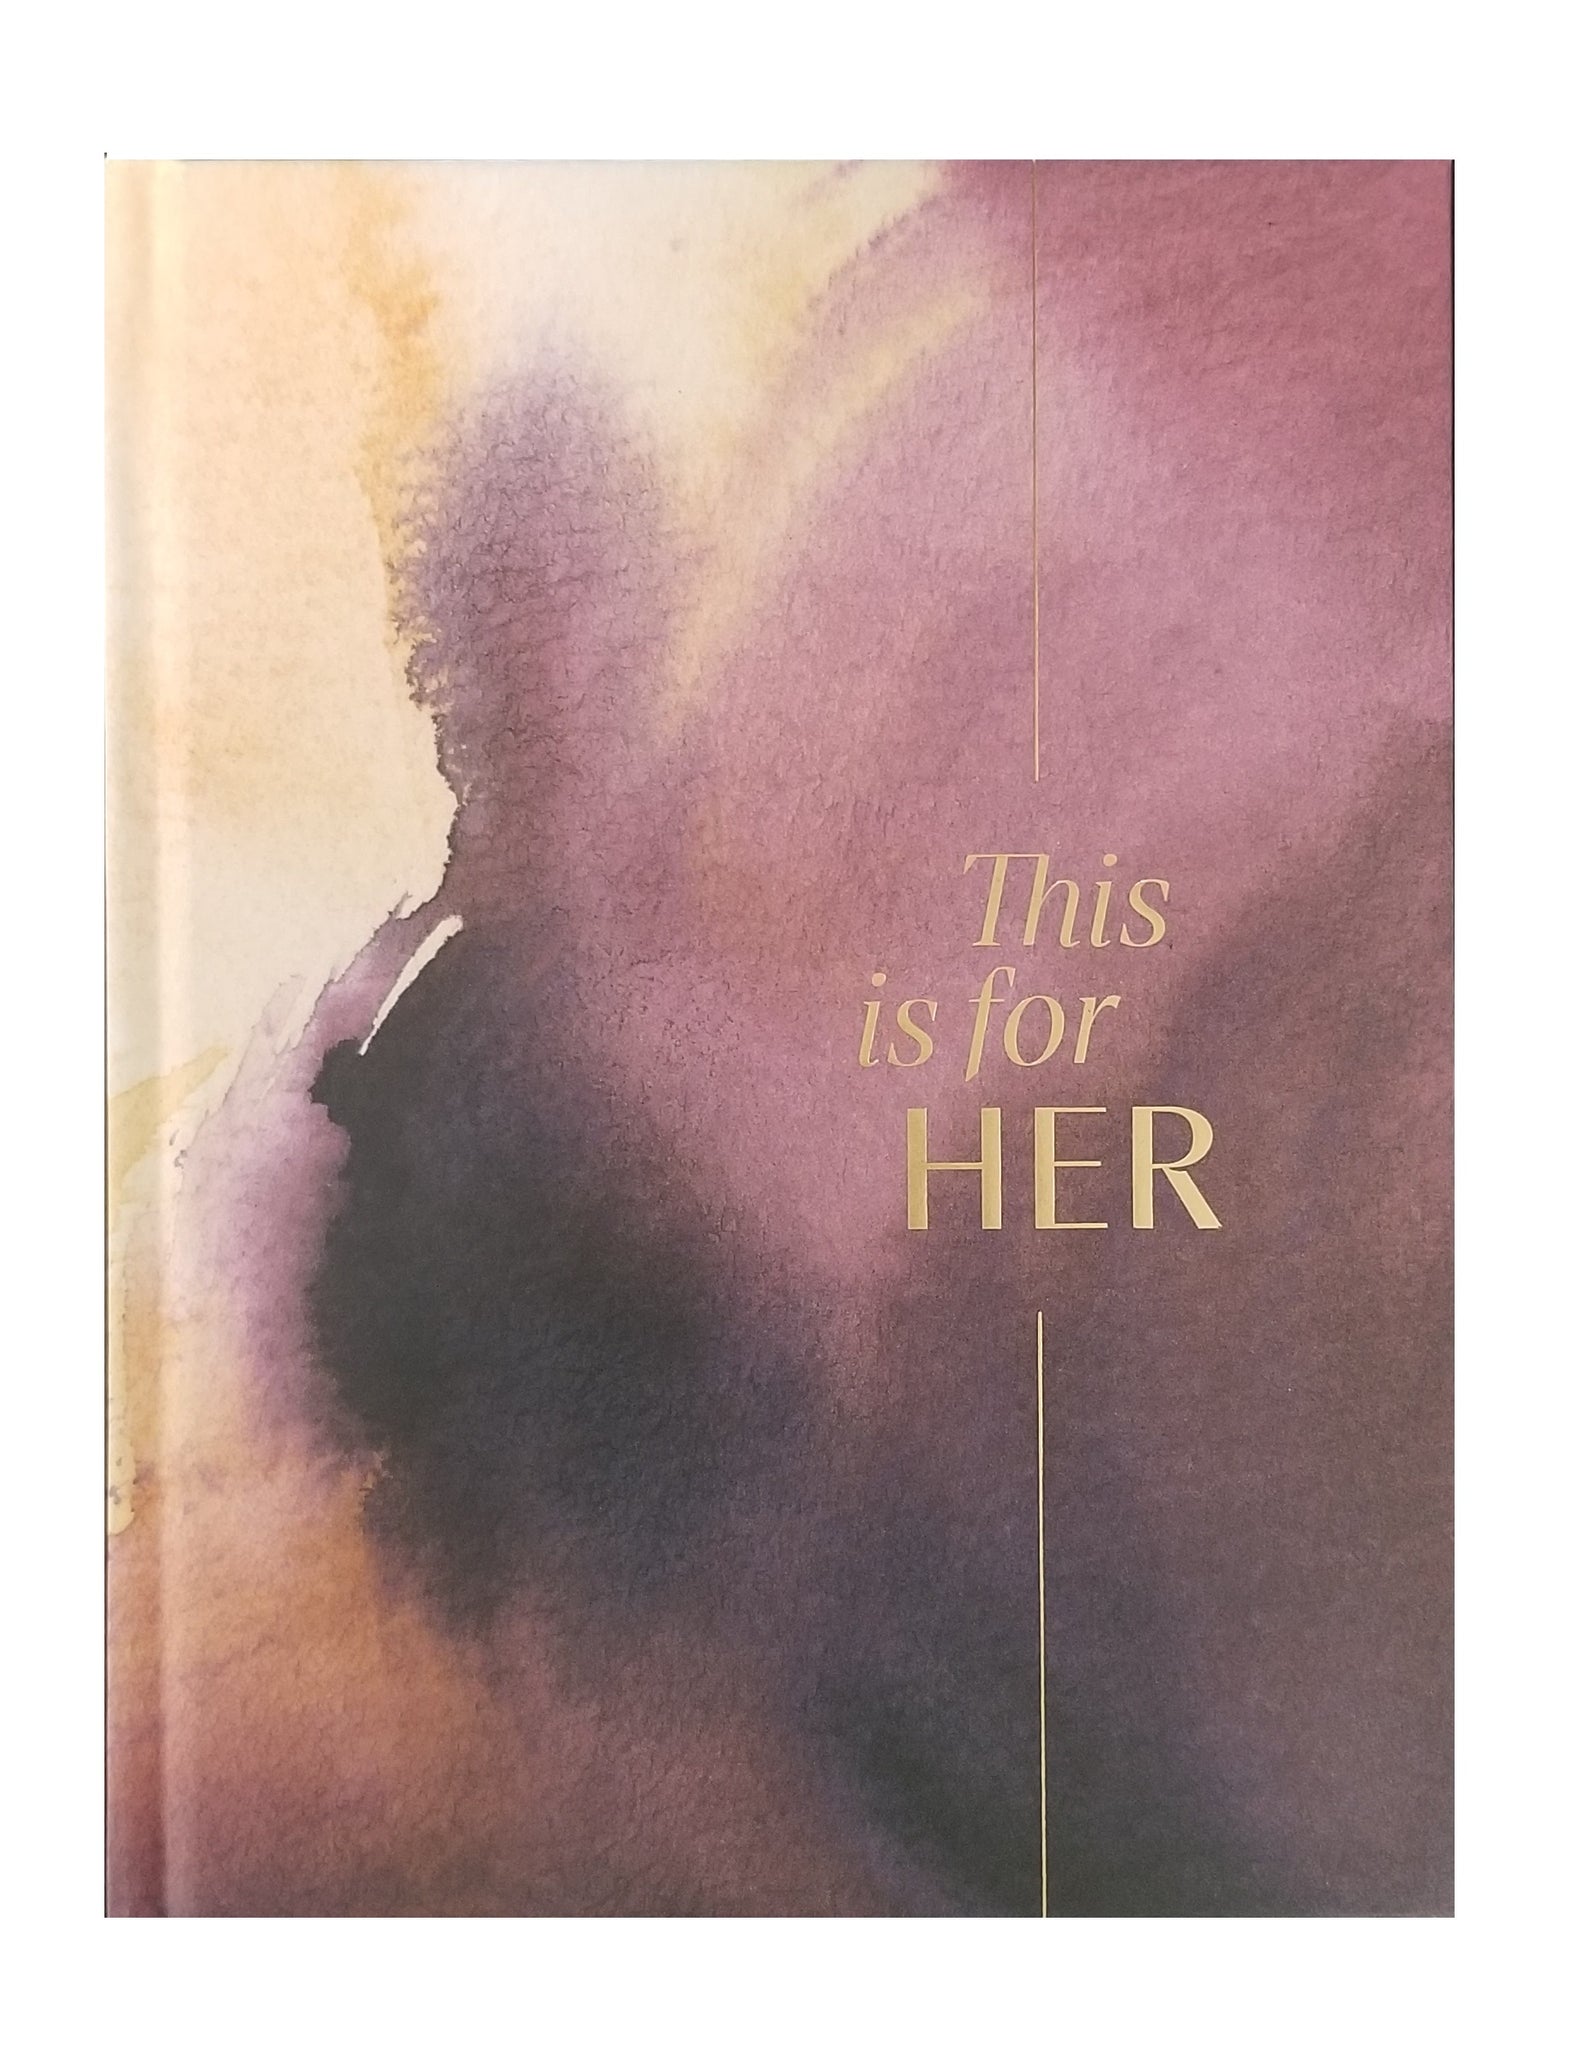 This is for HER - Gift Book